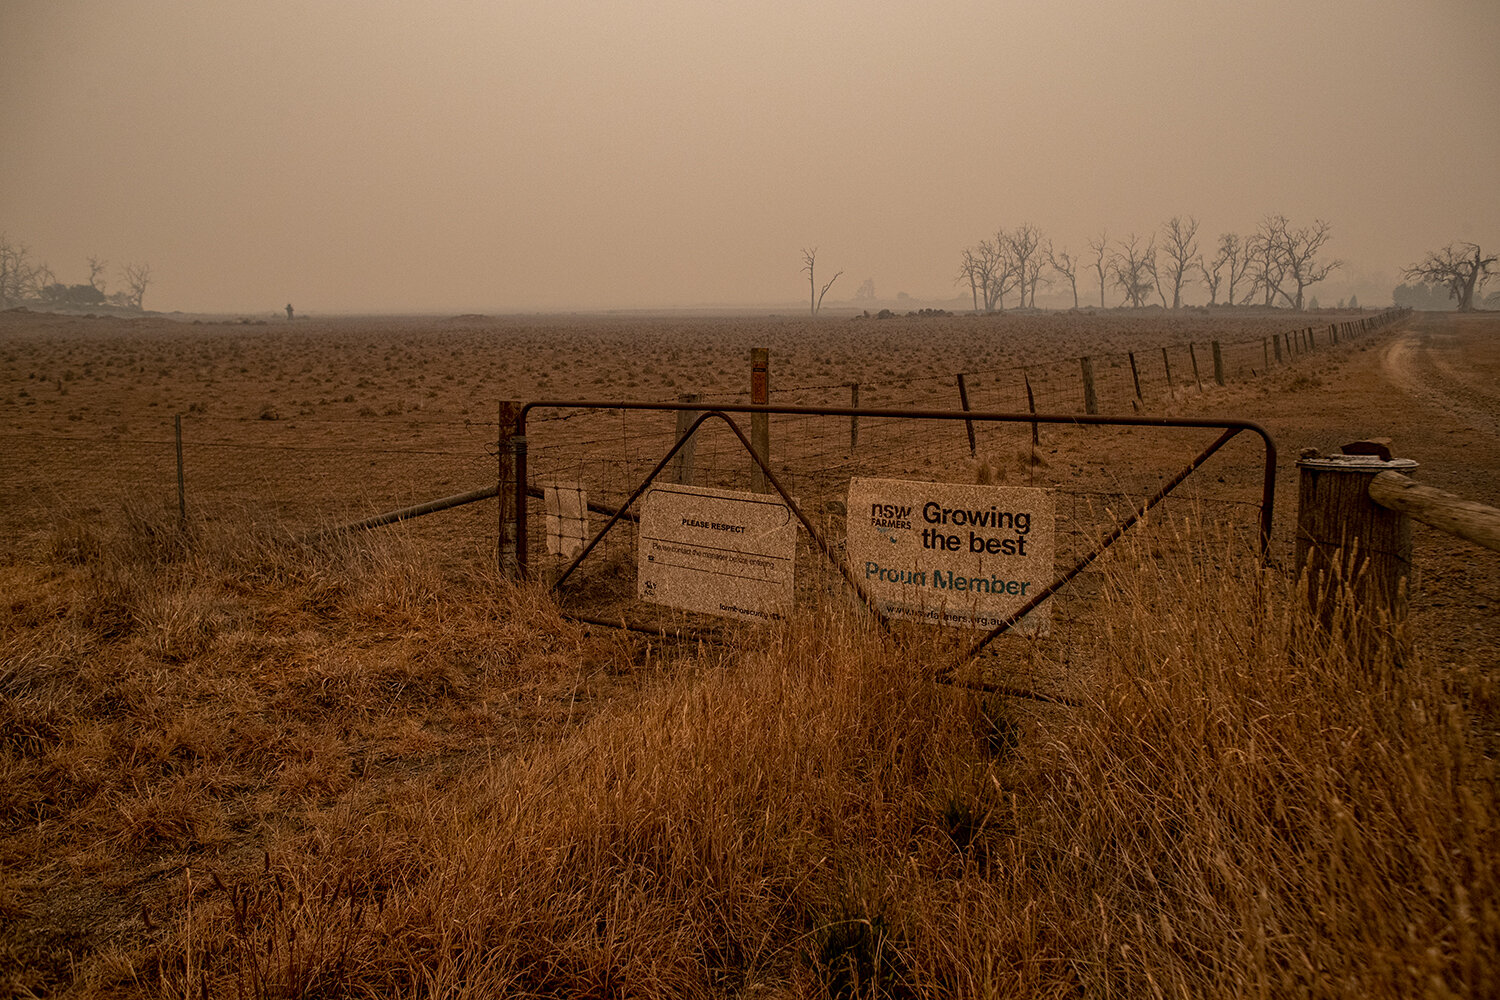  Smoke haze was a continuous feature in the Snowy Monaro region for months during the ‘Black Summer’ bushfires. The impact on humans and animals is inestimable. As the smoke haze sat eerily and heavy on the landscape it filled the lungs of all living